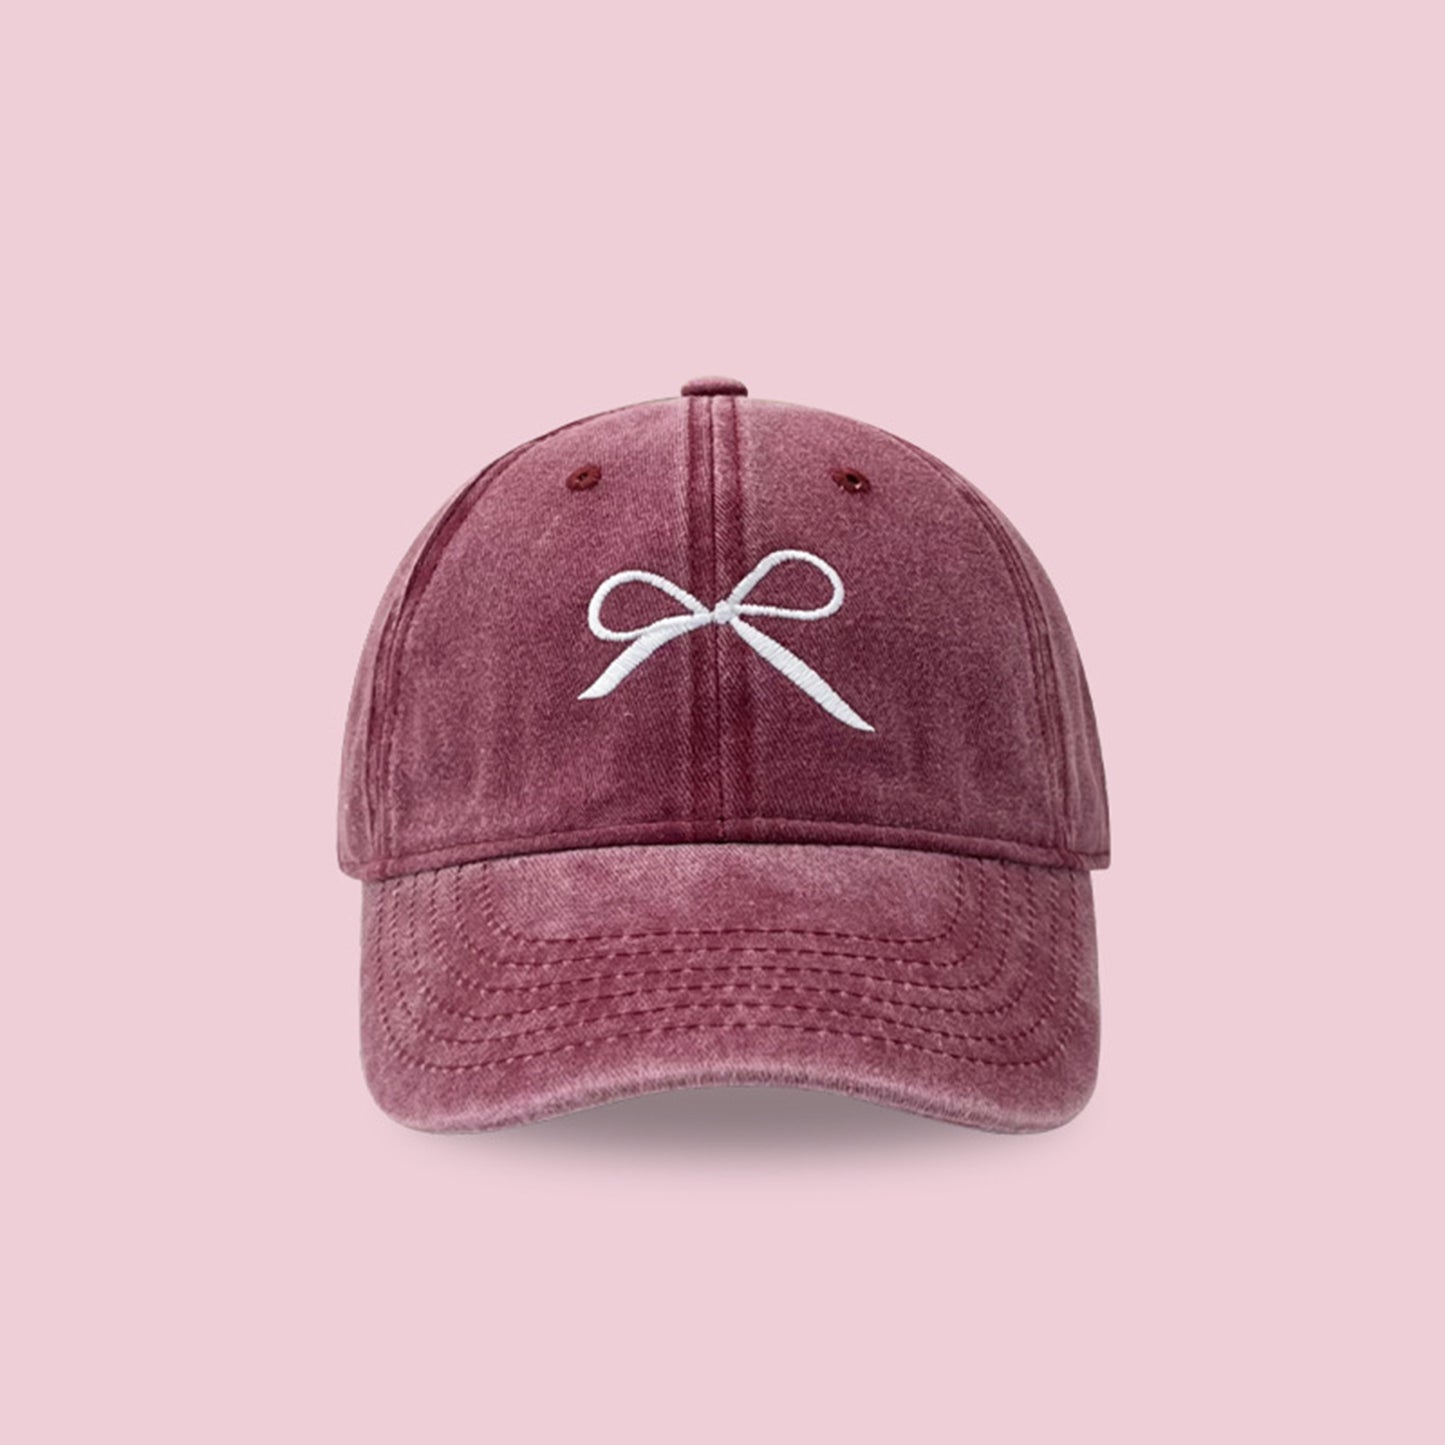 Bow Embroidered Adjustable Cap Burgundy One Size